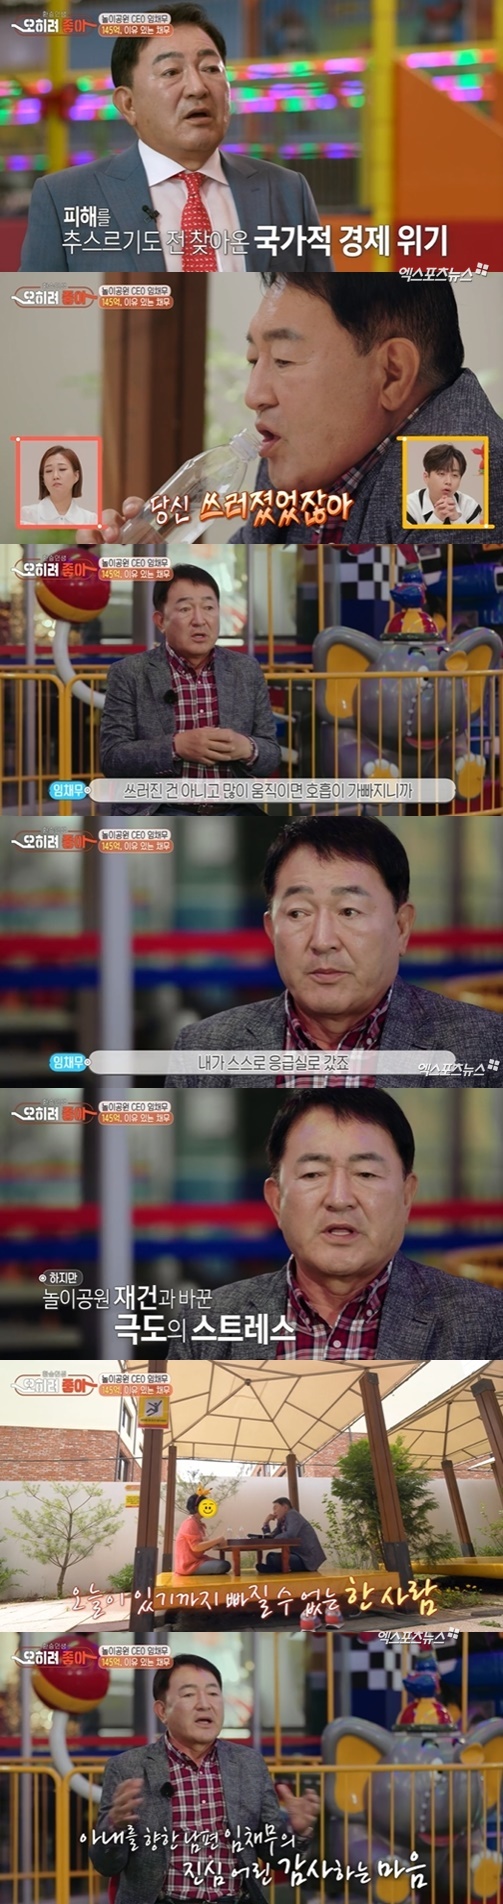 Transfer life, rather good im Chae-mu recalled the difficult memories of running an amusement park.MBC new pilot program Transfer Life, rather good broadcasted on the 17th appeared as Actor im Chae-mu, who runs an amusement park for children.I am a representative of the amusement park; I have 50 years of Actor career and have been running the amusement park for 33 years, said im Chae-mu.Im Chae-mu worked unstoppable before opening at the age of 74 as our age.After work, im Chae-mu managed the body temperature meter, installed a doorway guard line, and checked the ticket office kiosk, table and rides.Im Chae-mu told the production crew: It opened on May 1, 1889; people came in enormously; I got 2,000 won for admission.A week after the opening, a family member could not come in because there was no 8,000 won. He called the executive to break the ticket office.I first bought the land in 1989 and got a loan when I opened it in 90, and I still pay interest to 4 billion people who borrowed it.The remaining World Bank debt is about 14.5 billion won, and when the typhoon and rainy season came, the bank was overflowing and the 2 billion-won facility was swept down in 15 minutes.I could not make money because the IMF came to me afterwards. Im Chae-mu settled a meal with his wife Kim So-yeon in a pretense.My wife asked, At first, everyone is ruined, when I said I was ruined, when I sat down and drank a beer, was it too good?I dont want to go back to the beautiful things in the past, but I thought about who I was going to go to and ask for money, said im Chae-mu.Did you not fall on the toilet bench? the wife recalled.Im Chae-mu told the production team: Heart Rhythm Society came.He didnt fall, but if he moved a lot, he was breathing fast, so he went to the emergency room.I went to World Bank a few times to get a default. Im can do it. I came here.If you do your best and do not do bad things, someone will help you. Photo: MBC Broadcasting Screen